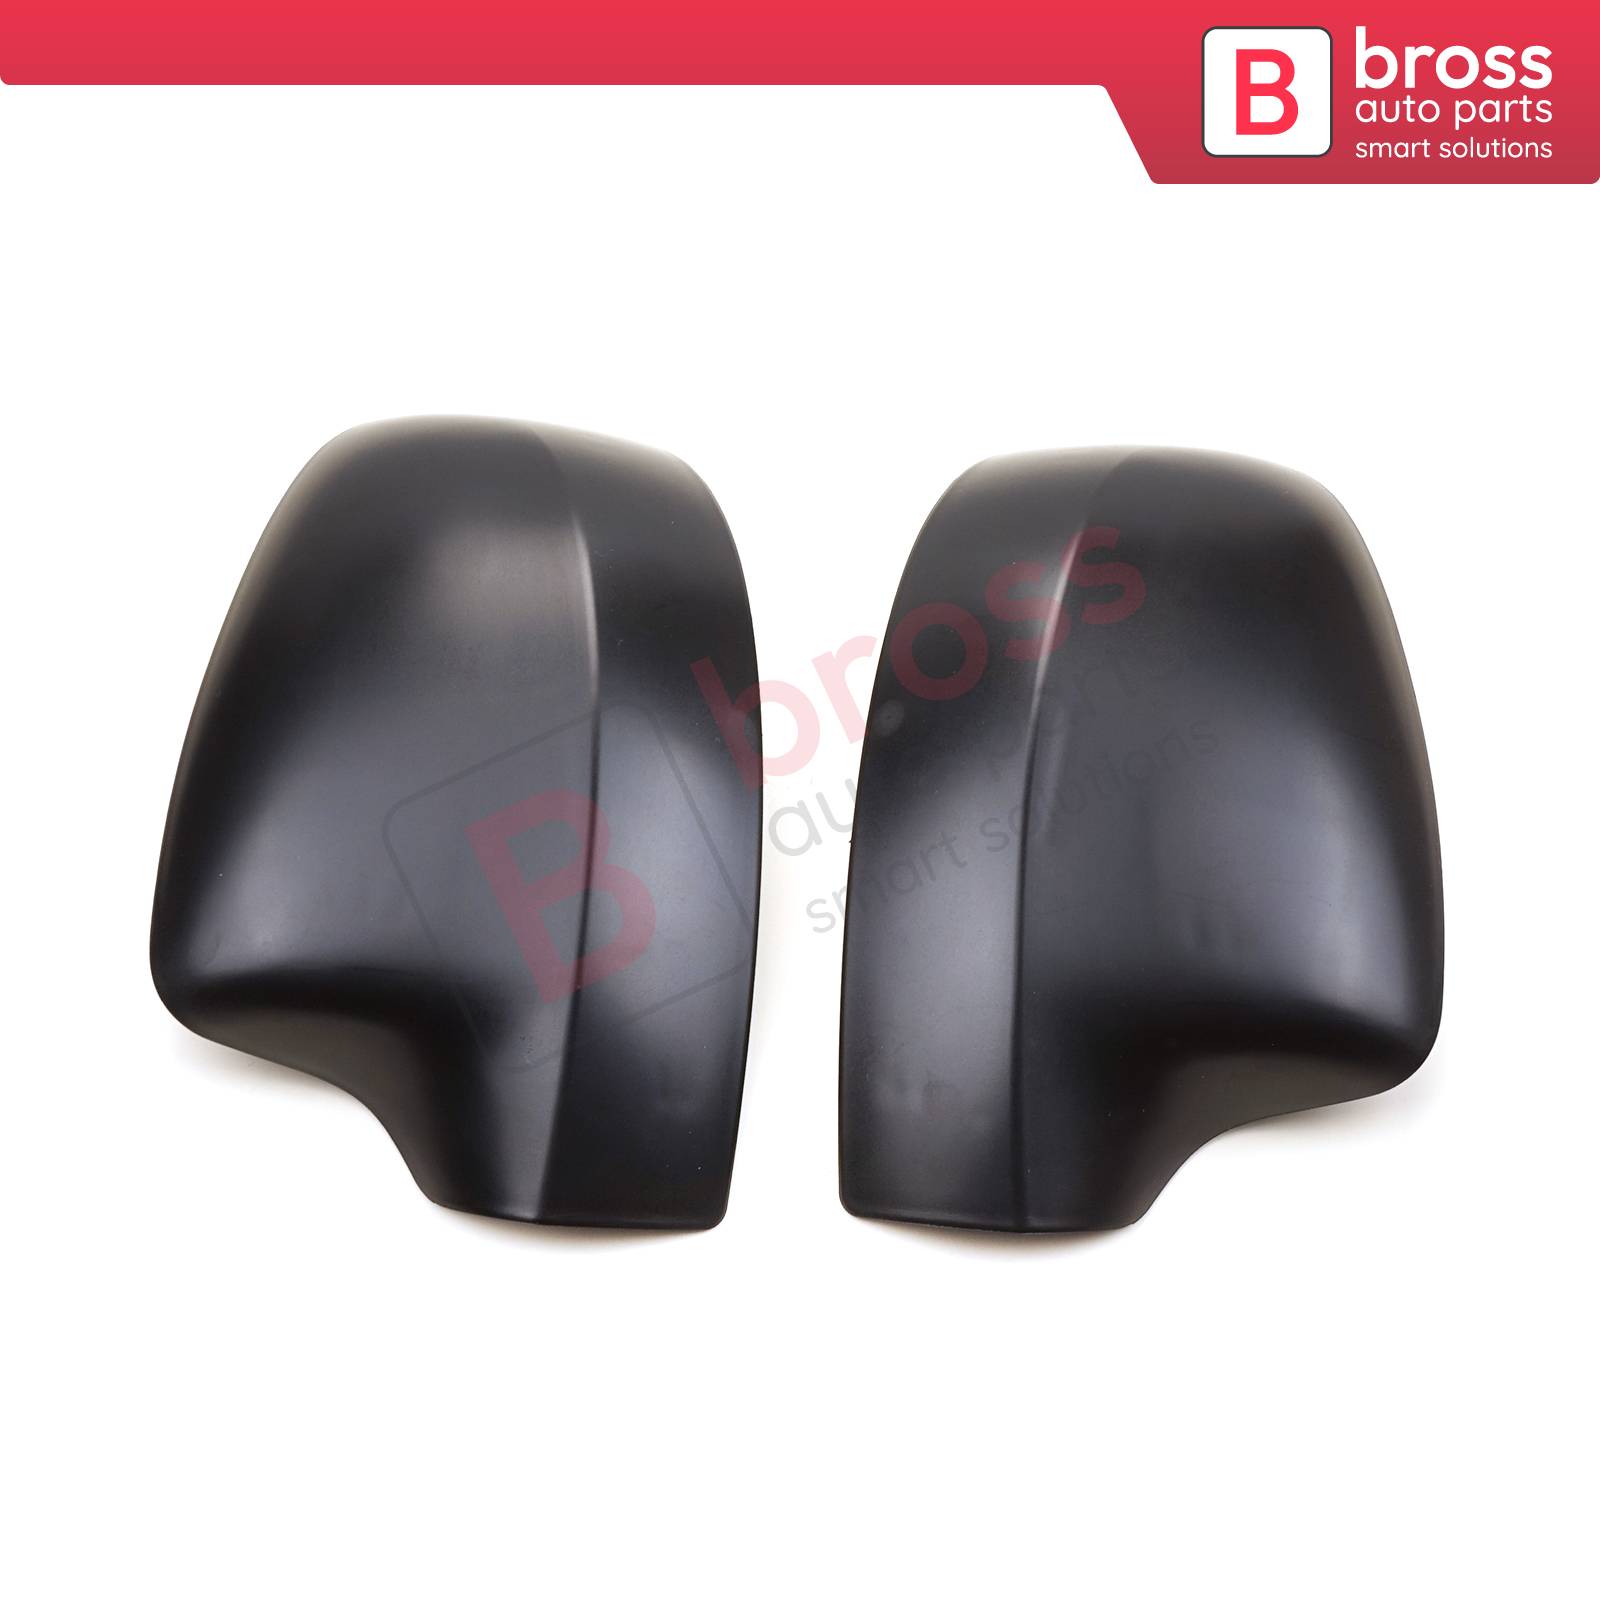 Bross Auto Parts LLC - BSP1104 Side Wing Mirror Scull Cap Cover